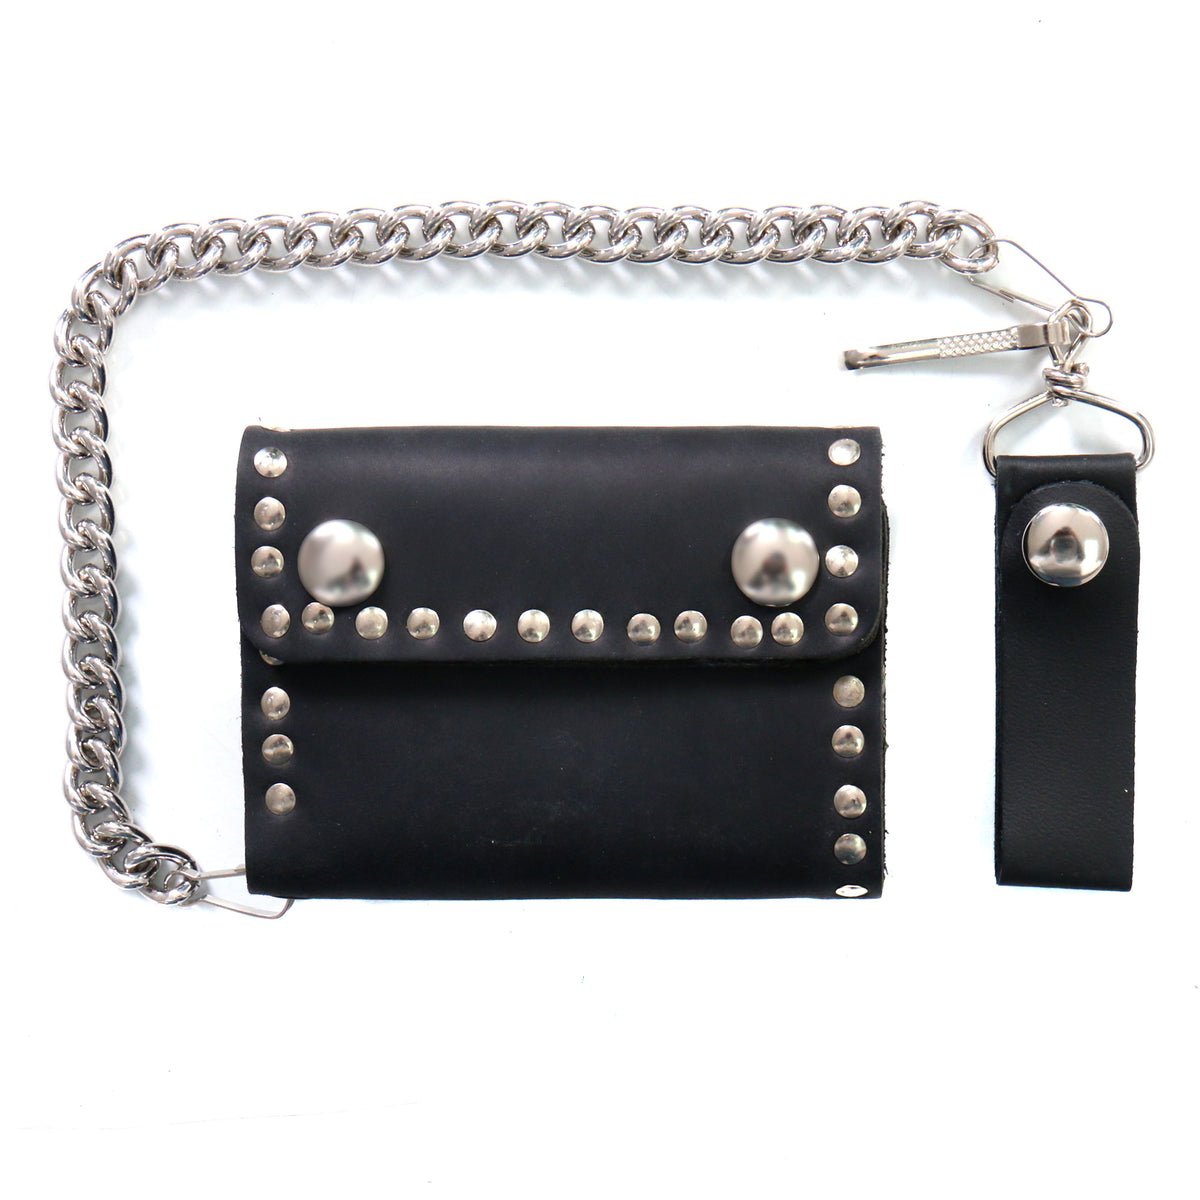 Hot Leathers 4" Naked Leather Studded Bifold Chain Wallet